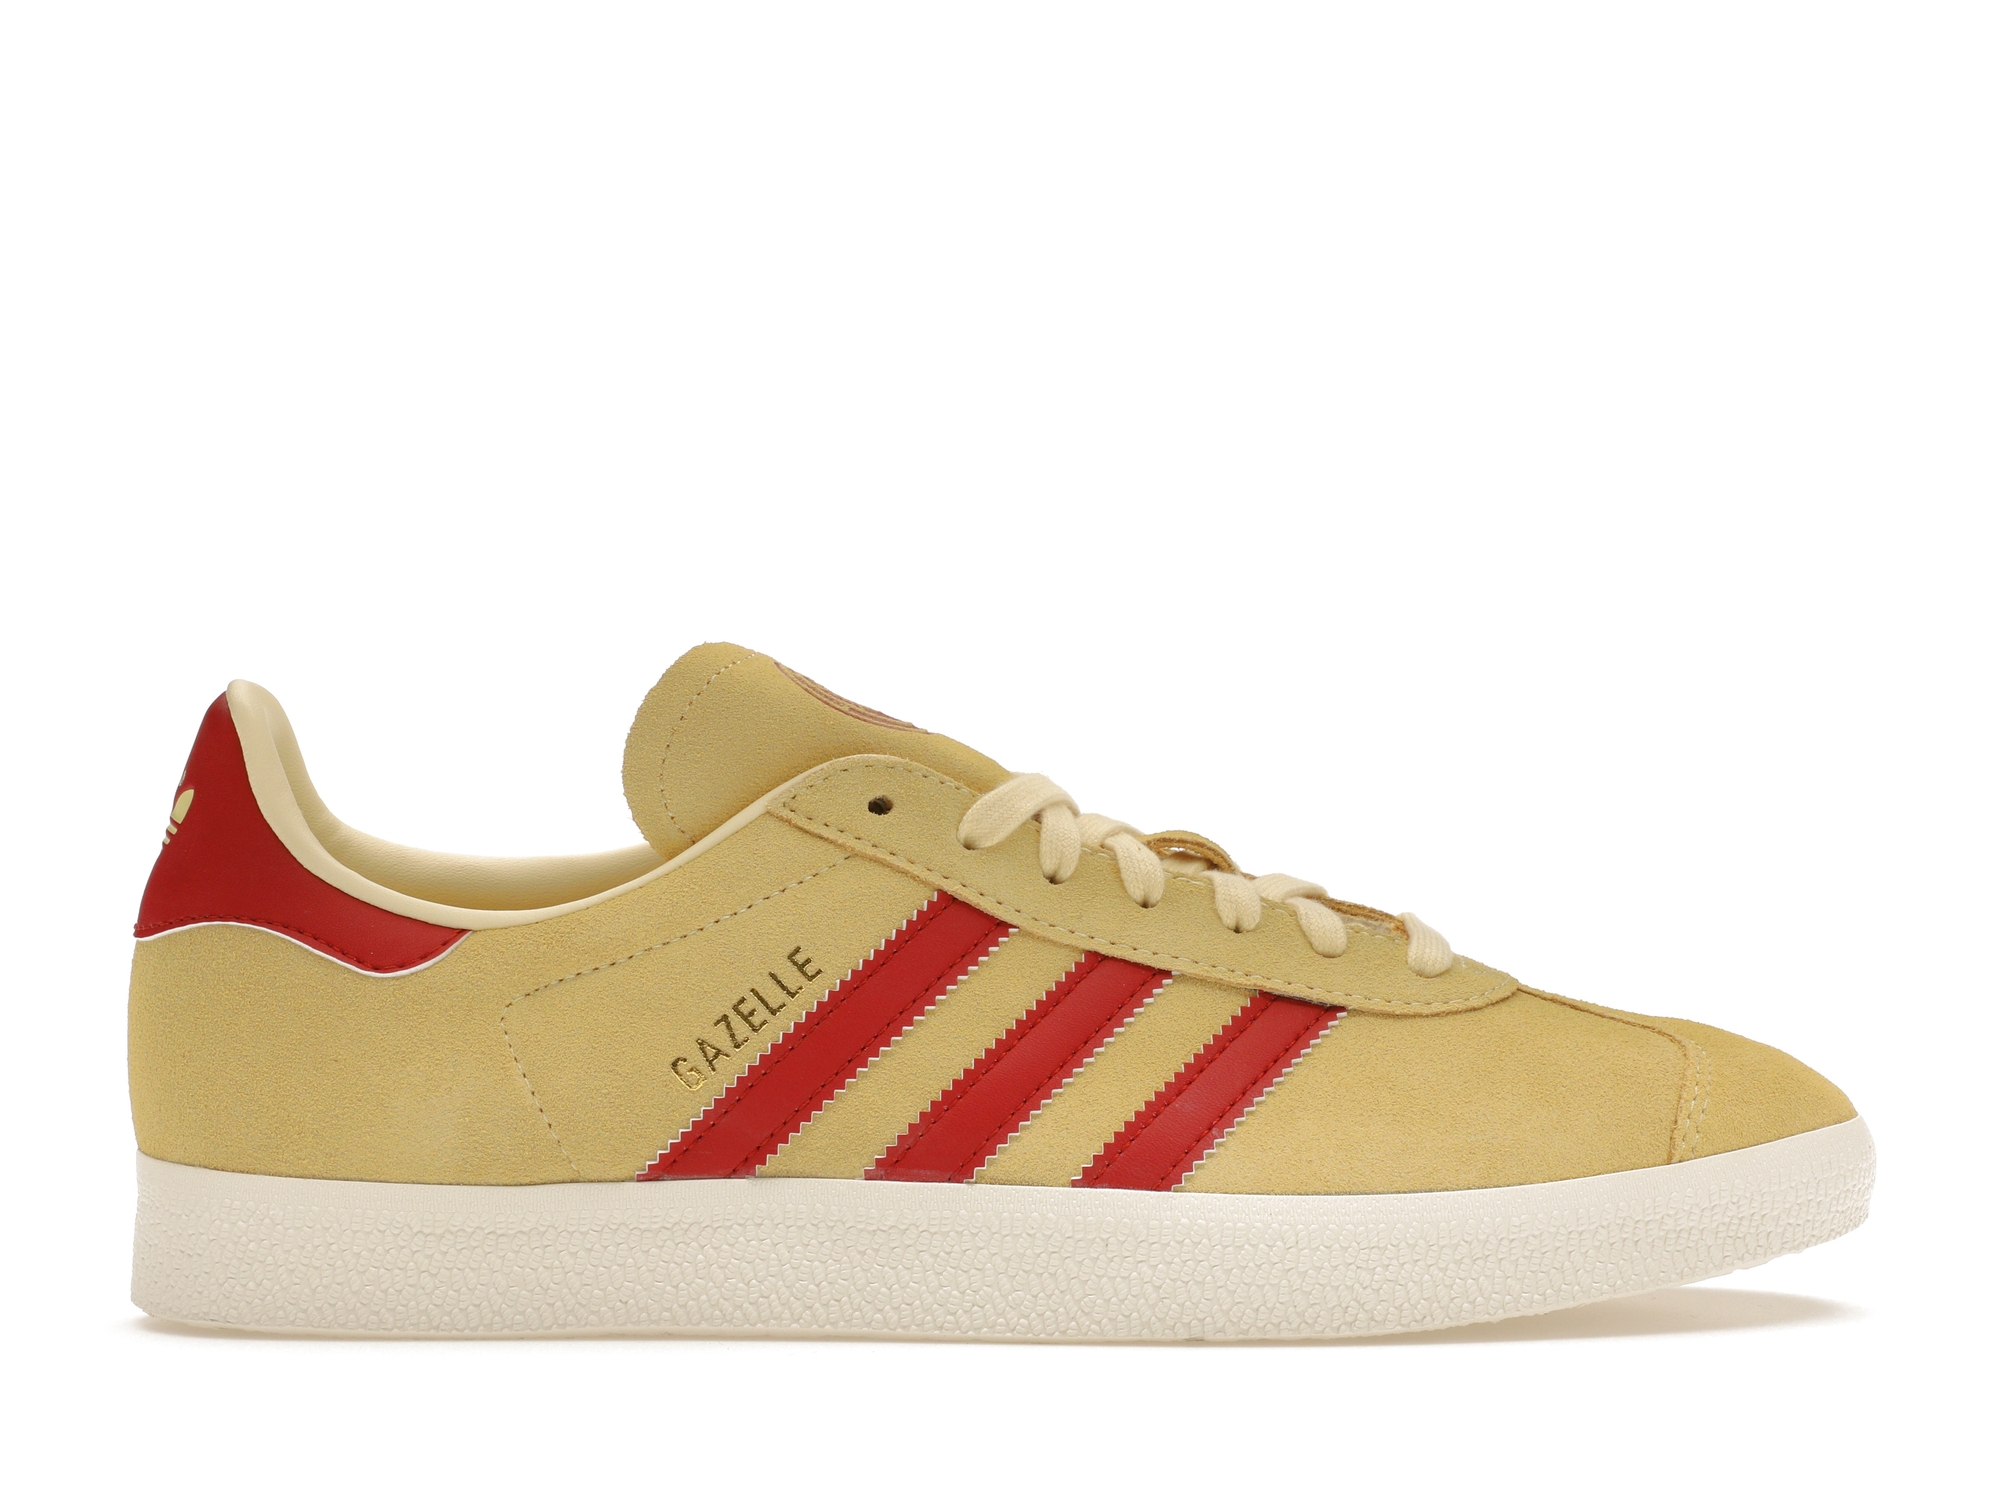 adidas gazelle red and yellow